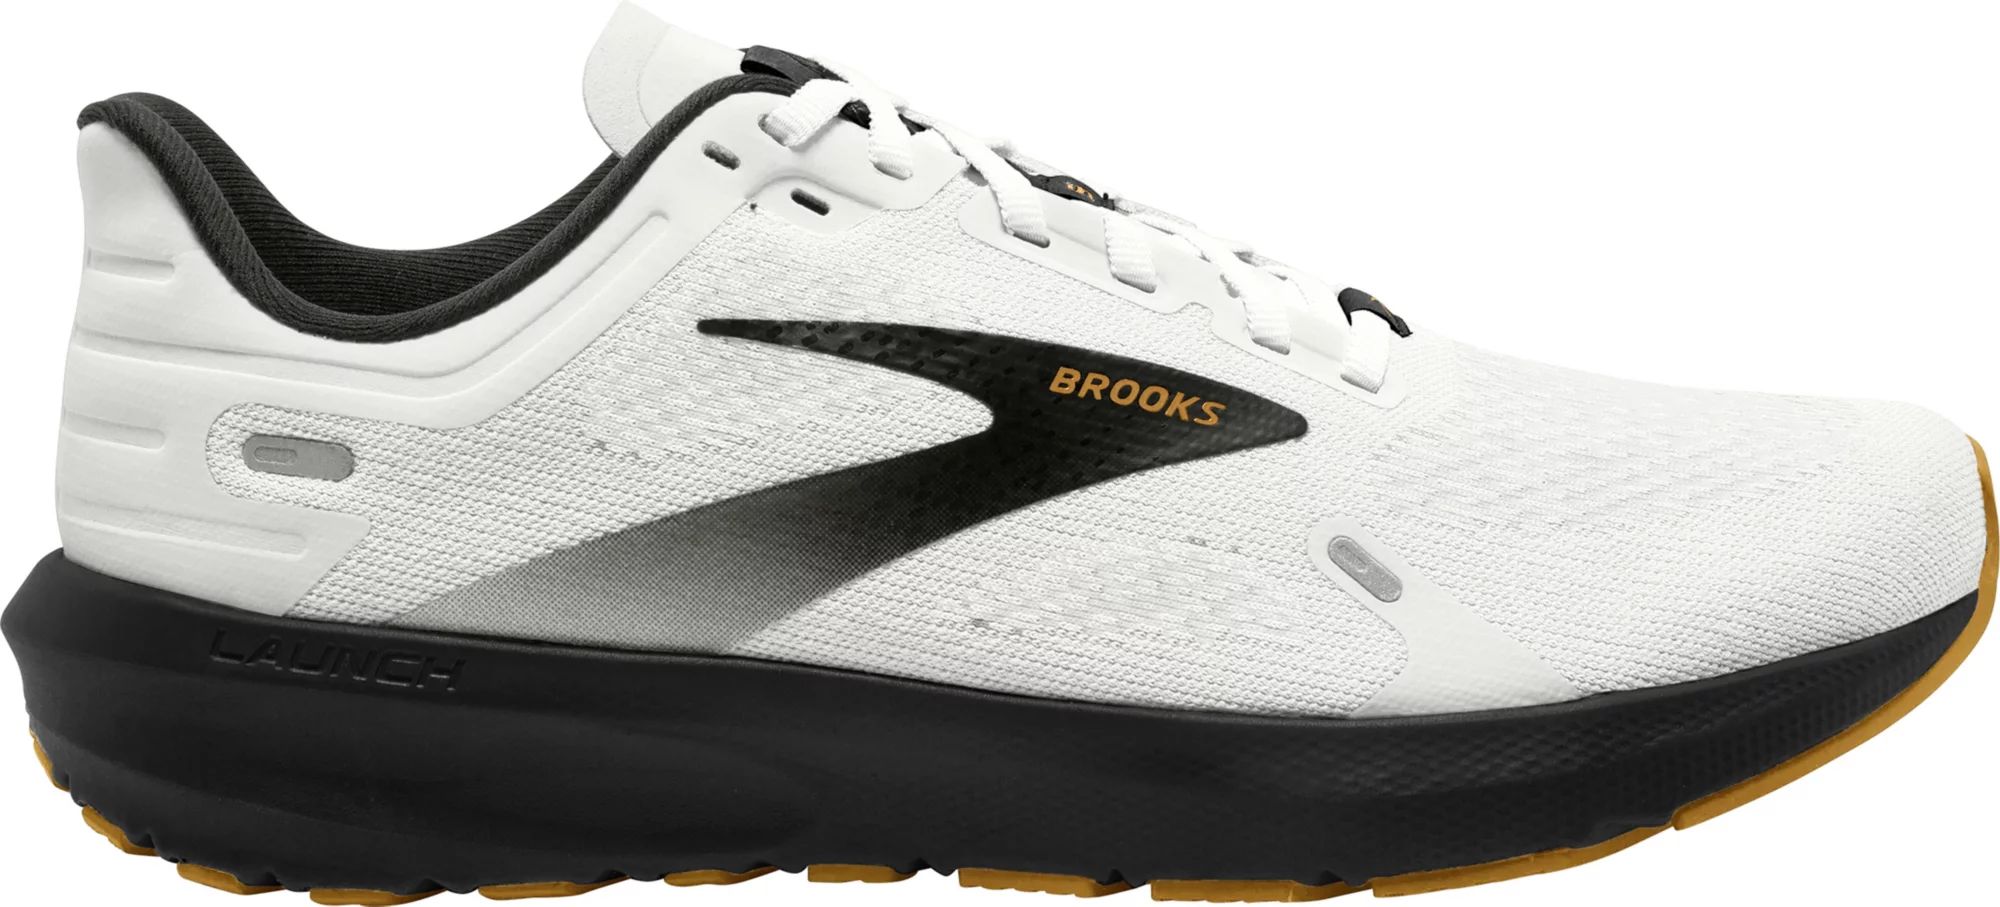 Brooks Women's Launch 9 Running Shoes, Size 6, White/Black | Dick's Sporting Goods